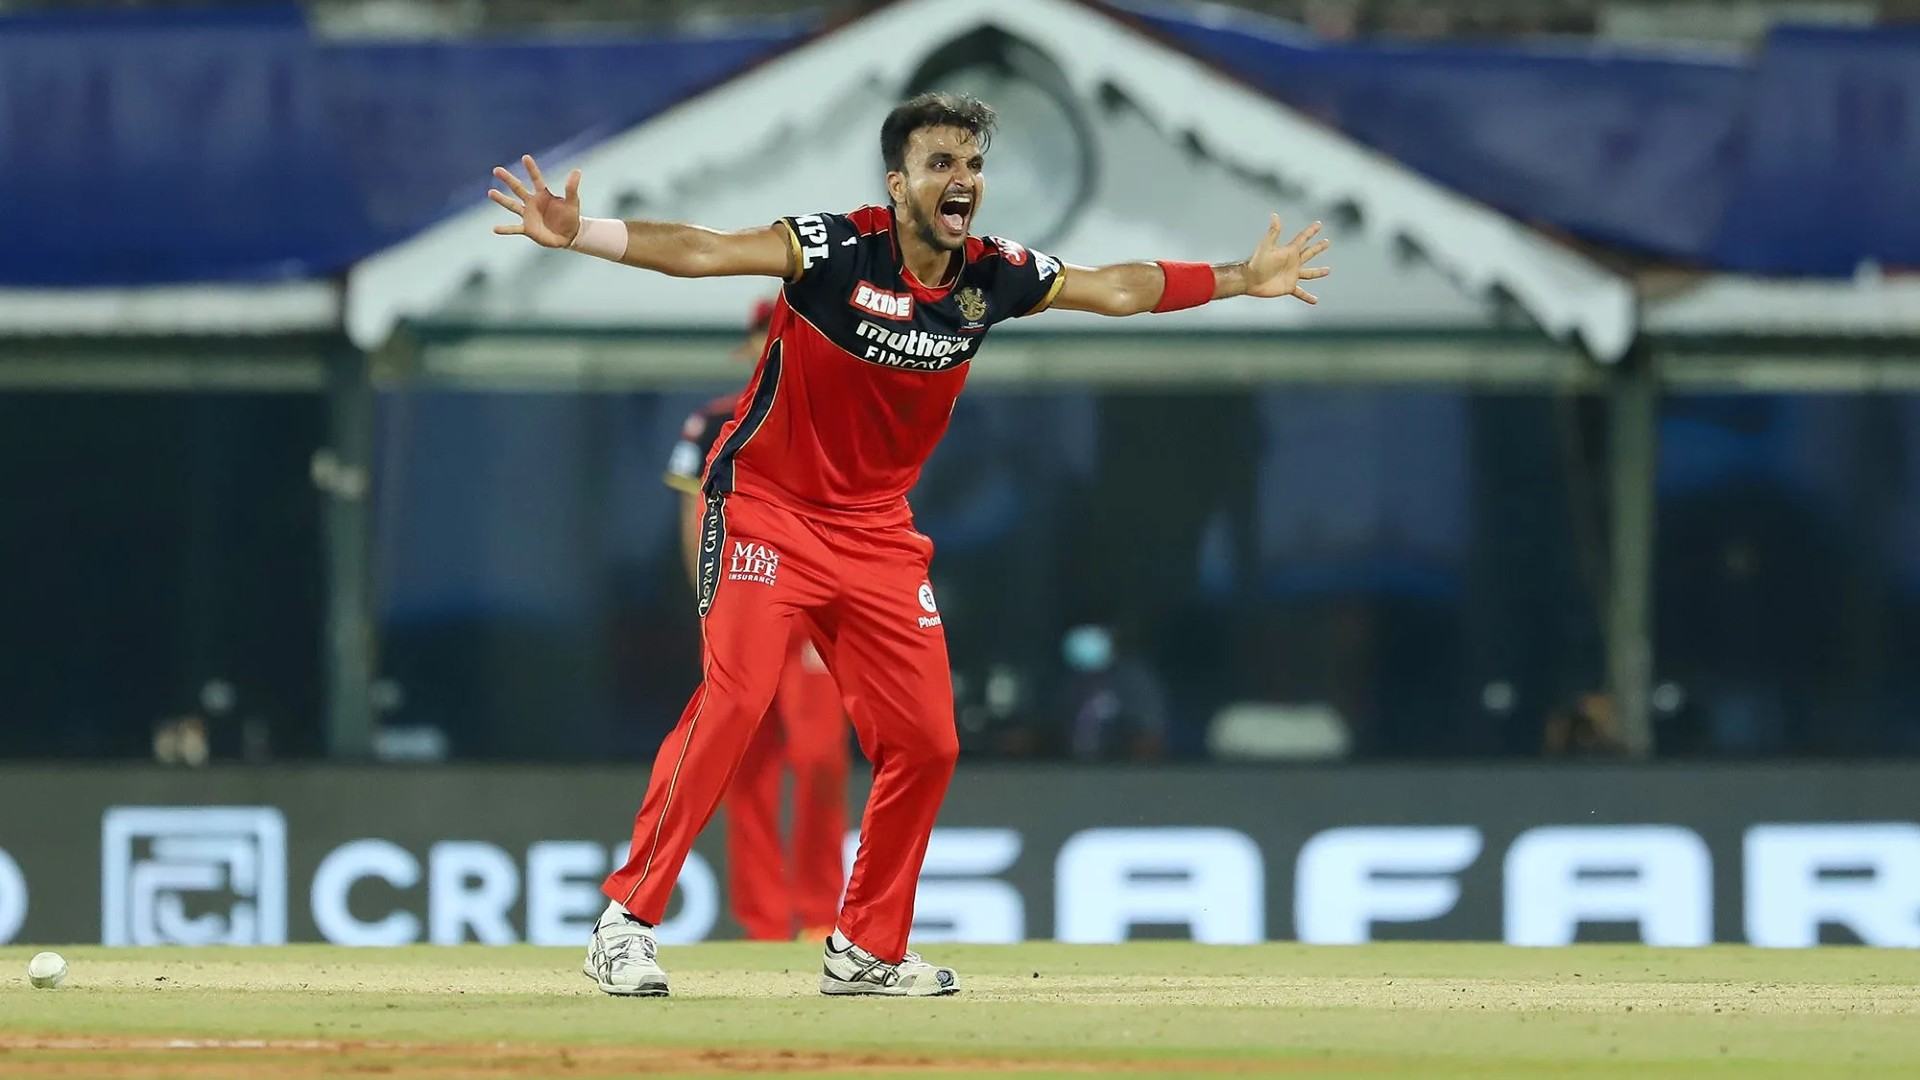 Harshal Patel appeals for a wicket in the MI vs RCB game. (Image: IPL/BCCI)